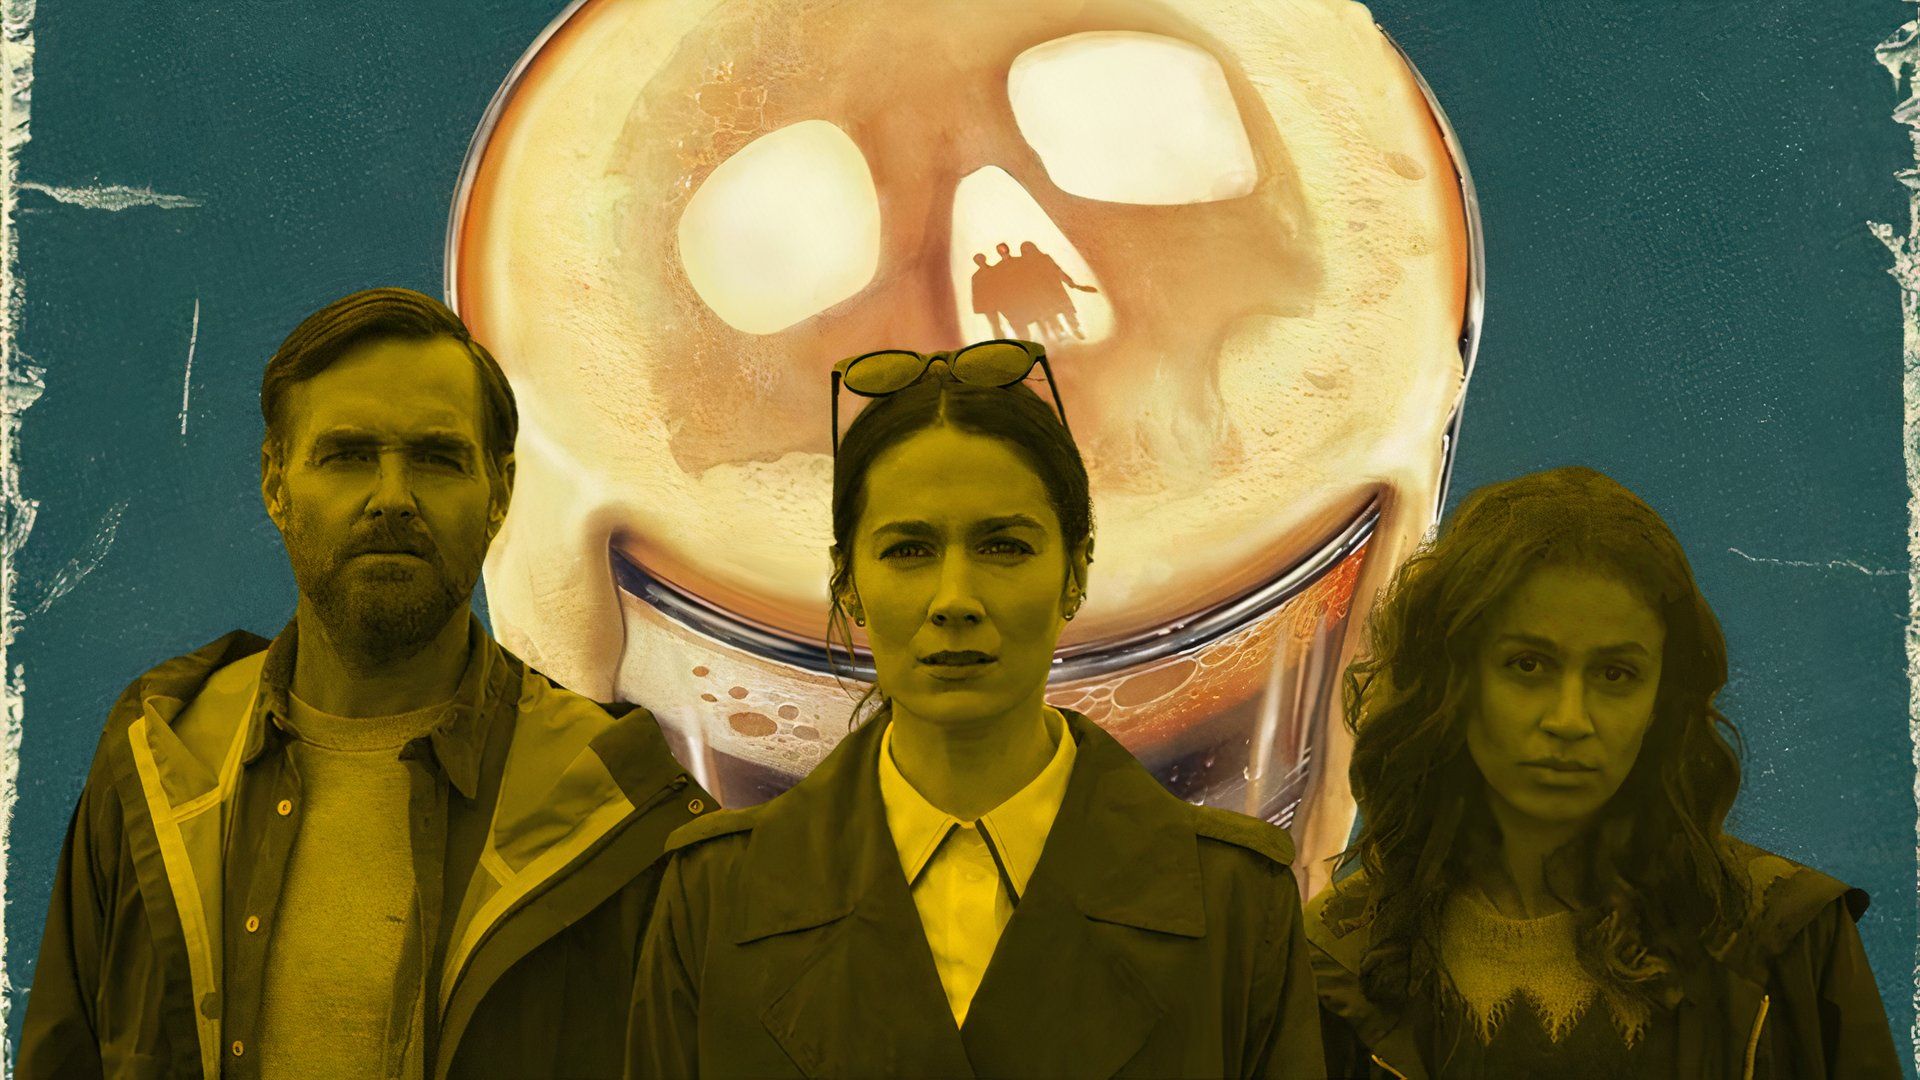 Siobhán Cullen, Robyn Cara, and Will Forte looking directly toward the camera in an edited image of Bodkin